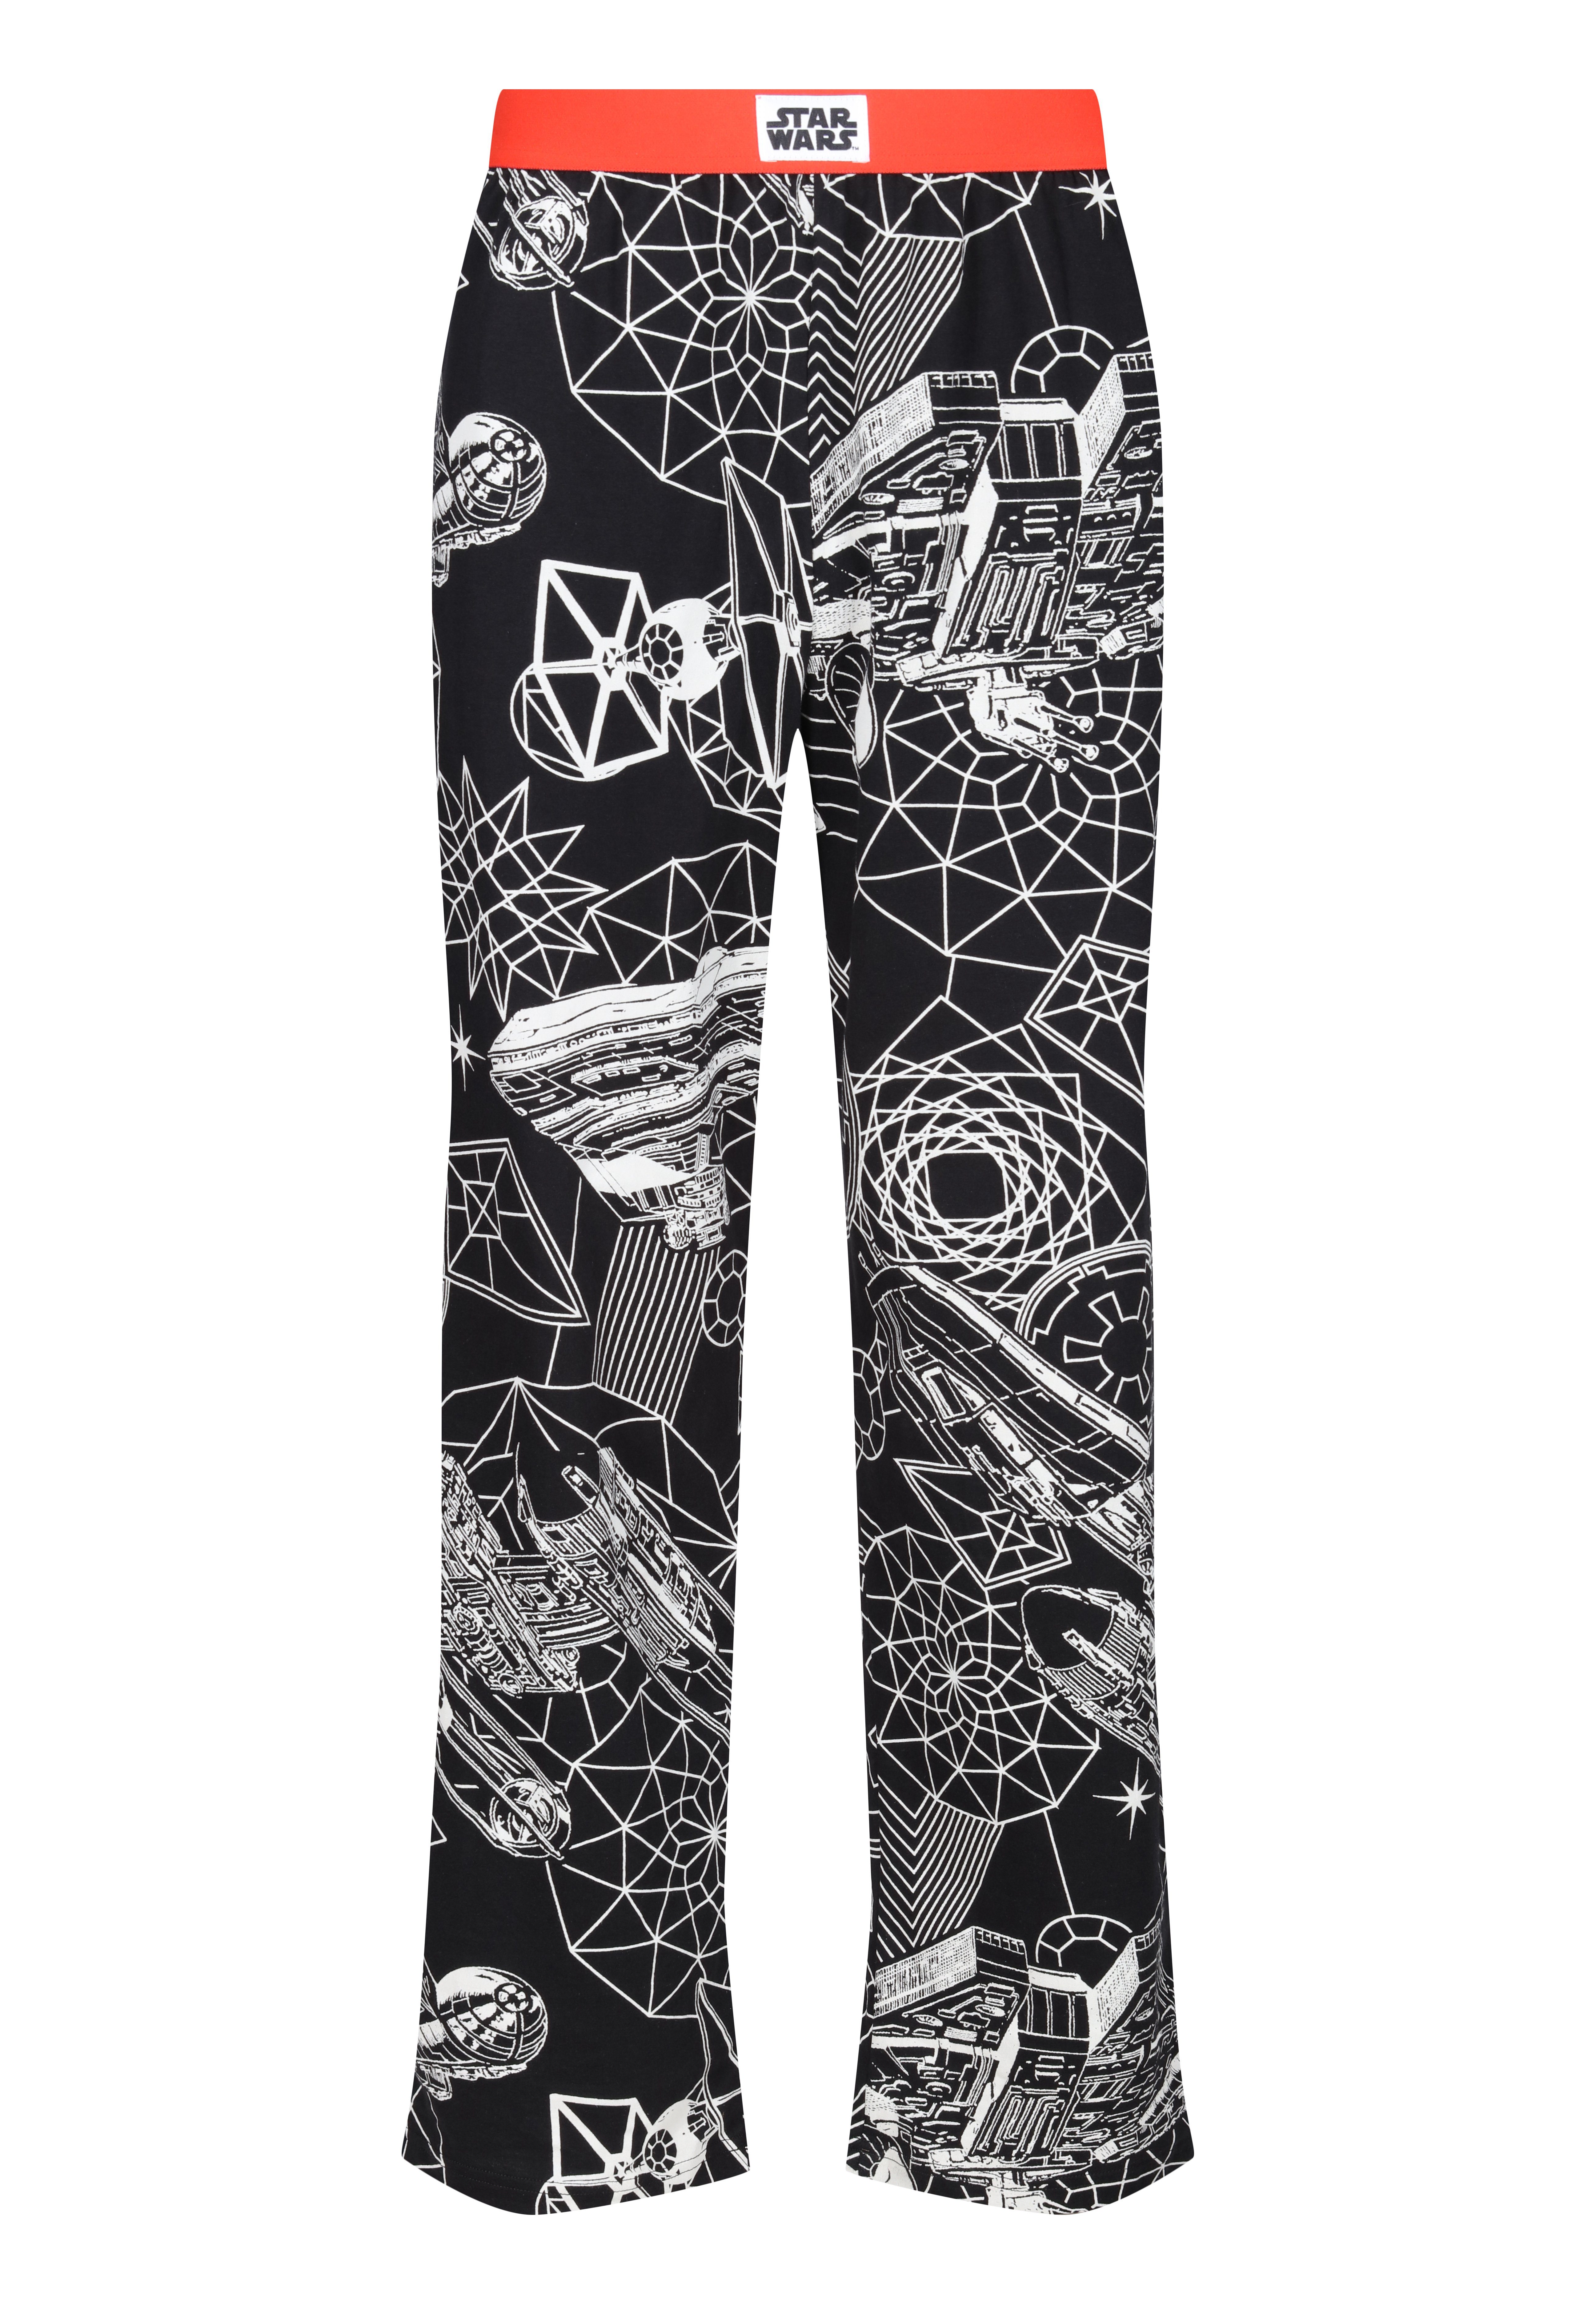 Recovered Loungepants Loungepant - Star Wars Ships Black